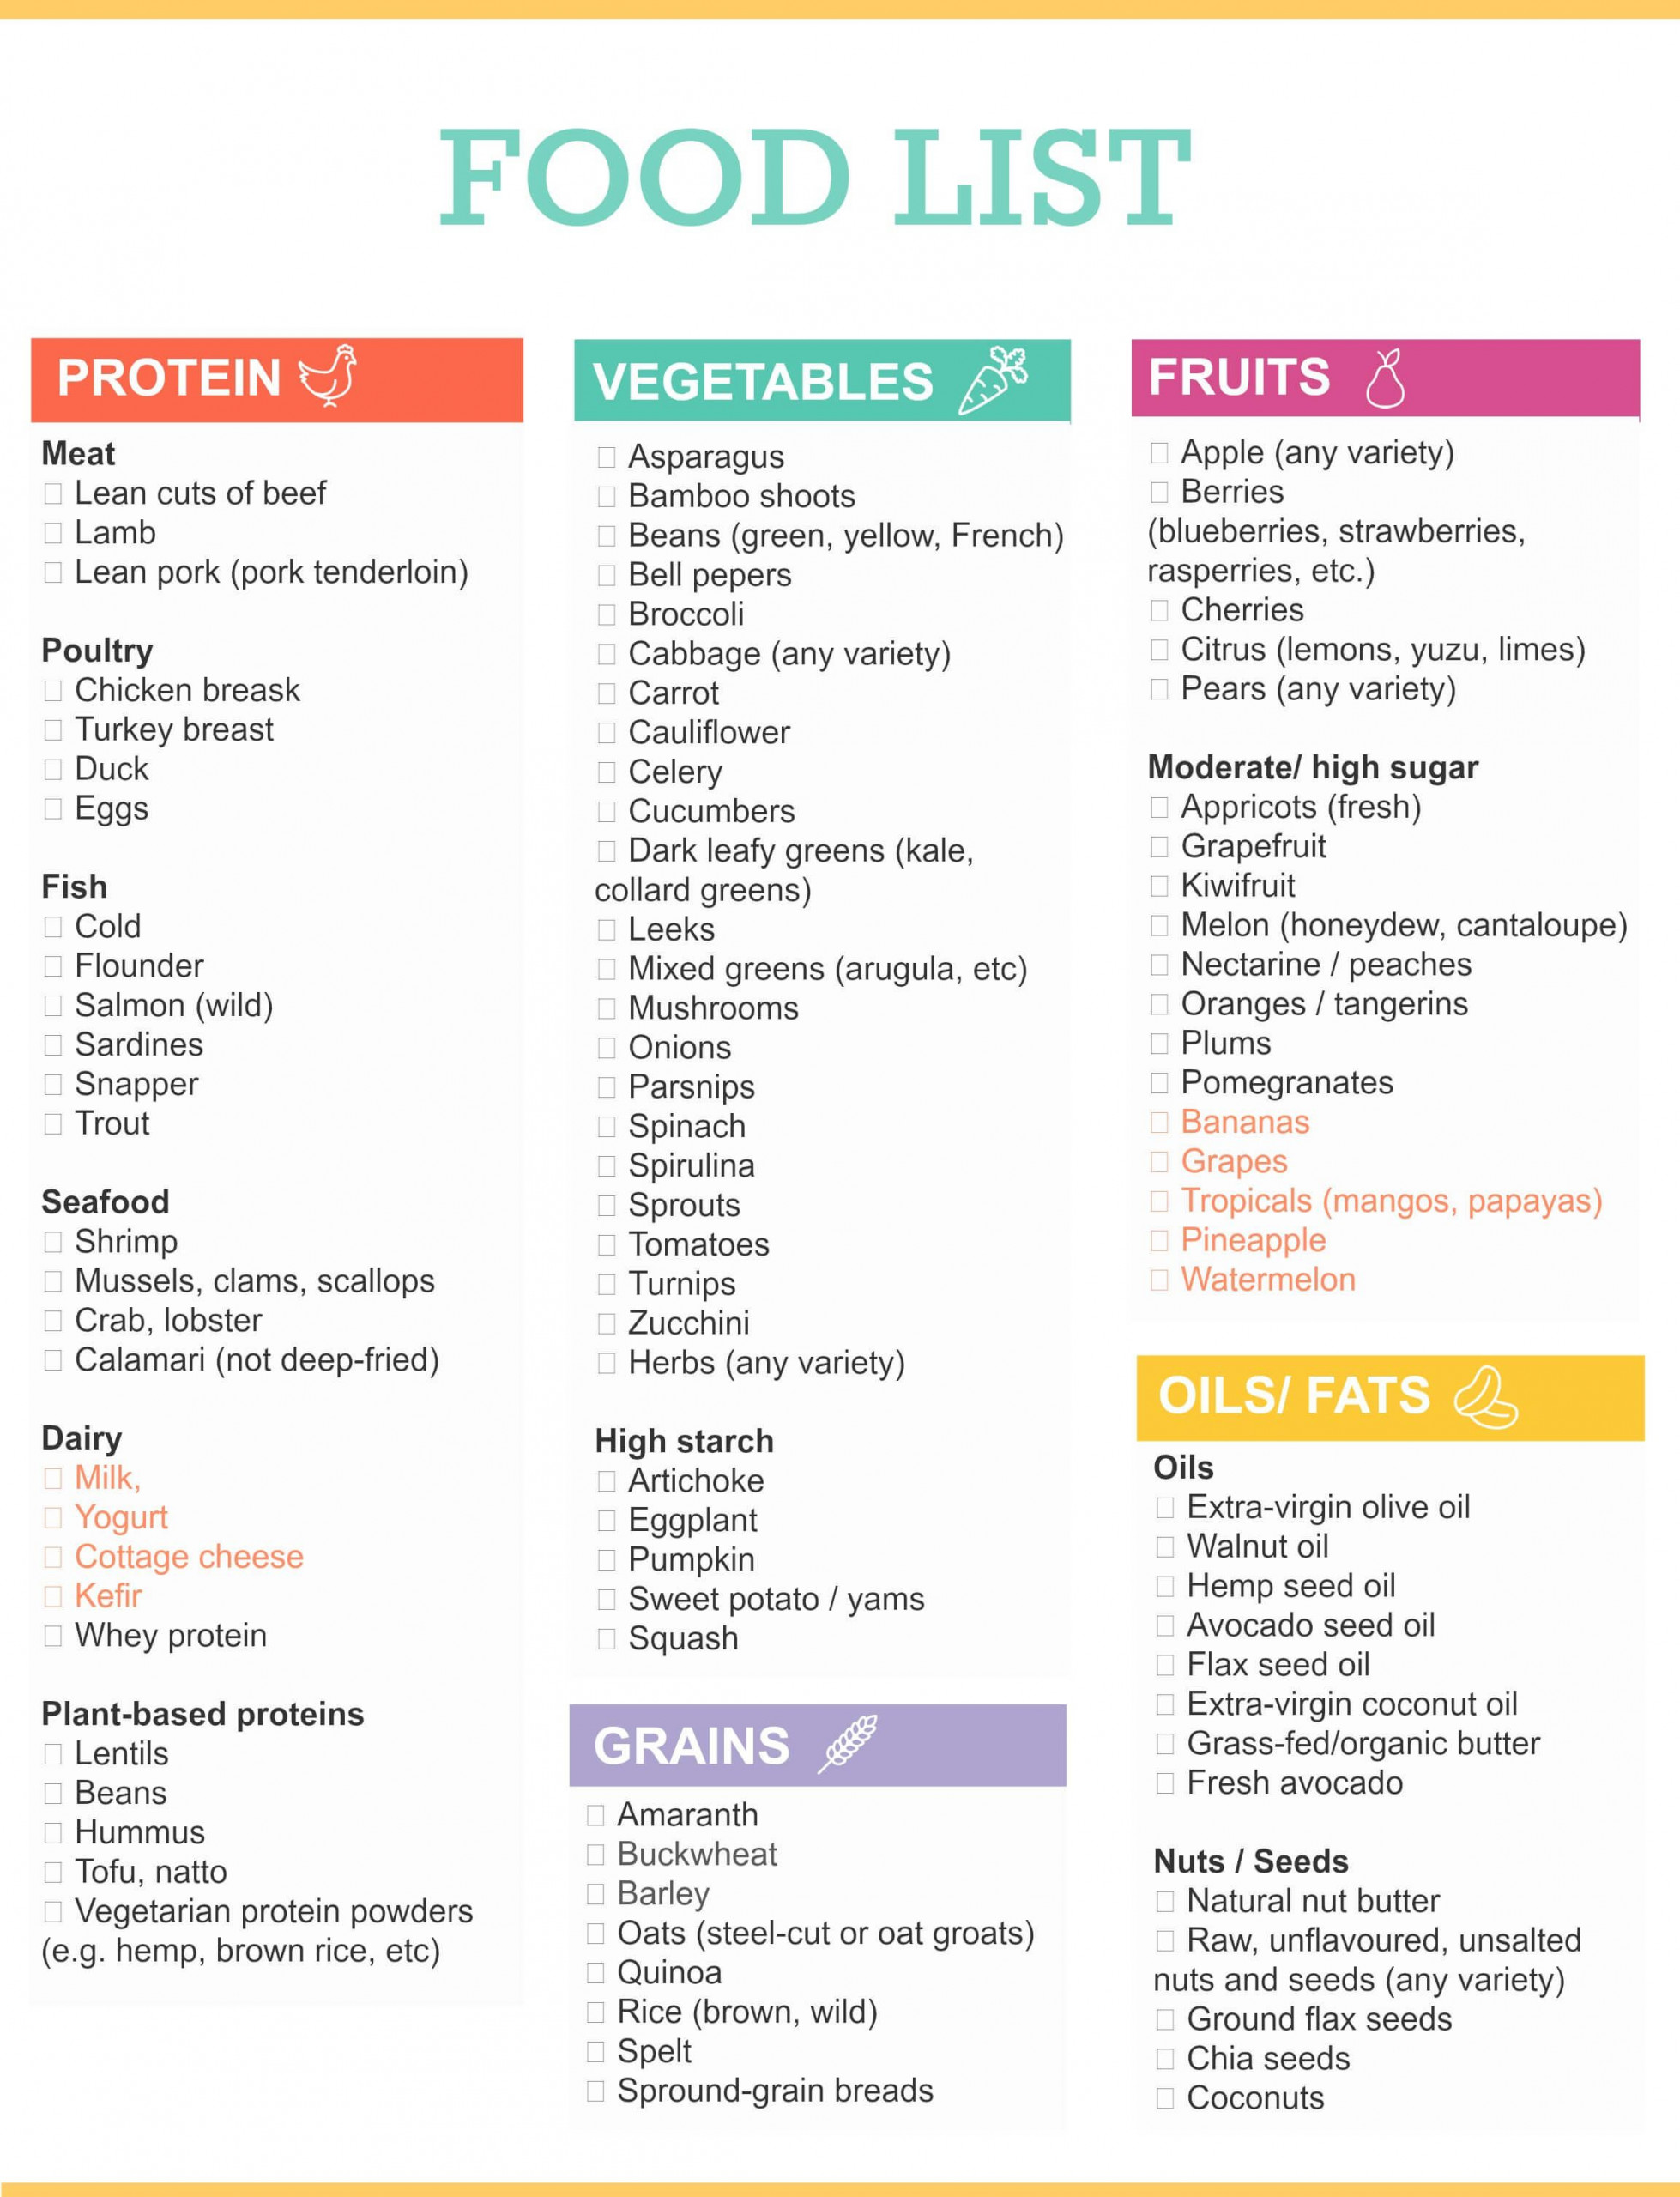 Grocery Shopping List diets foodslist health Healthy 